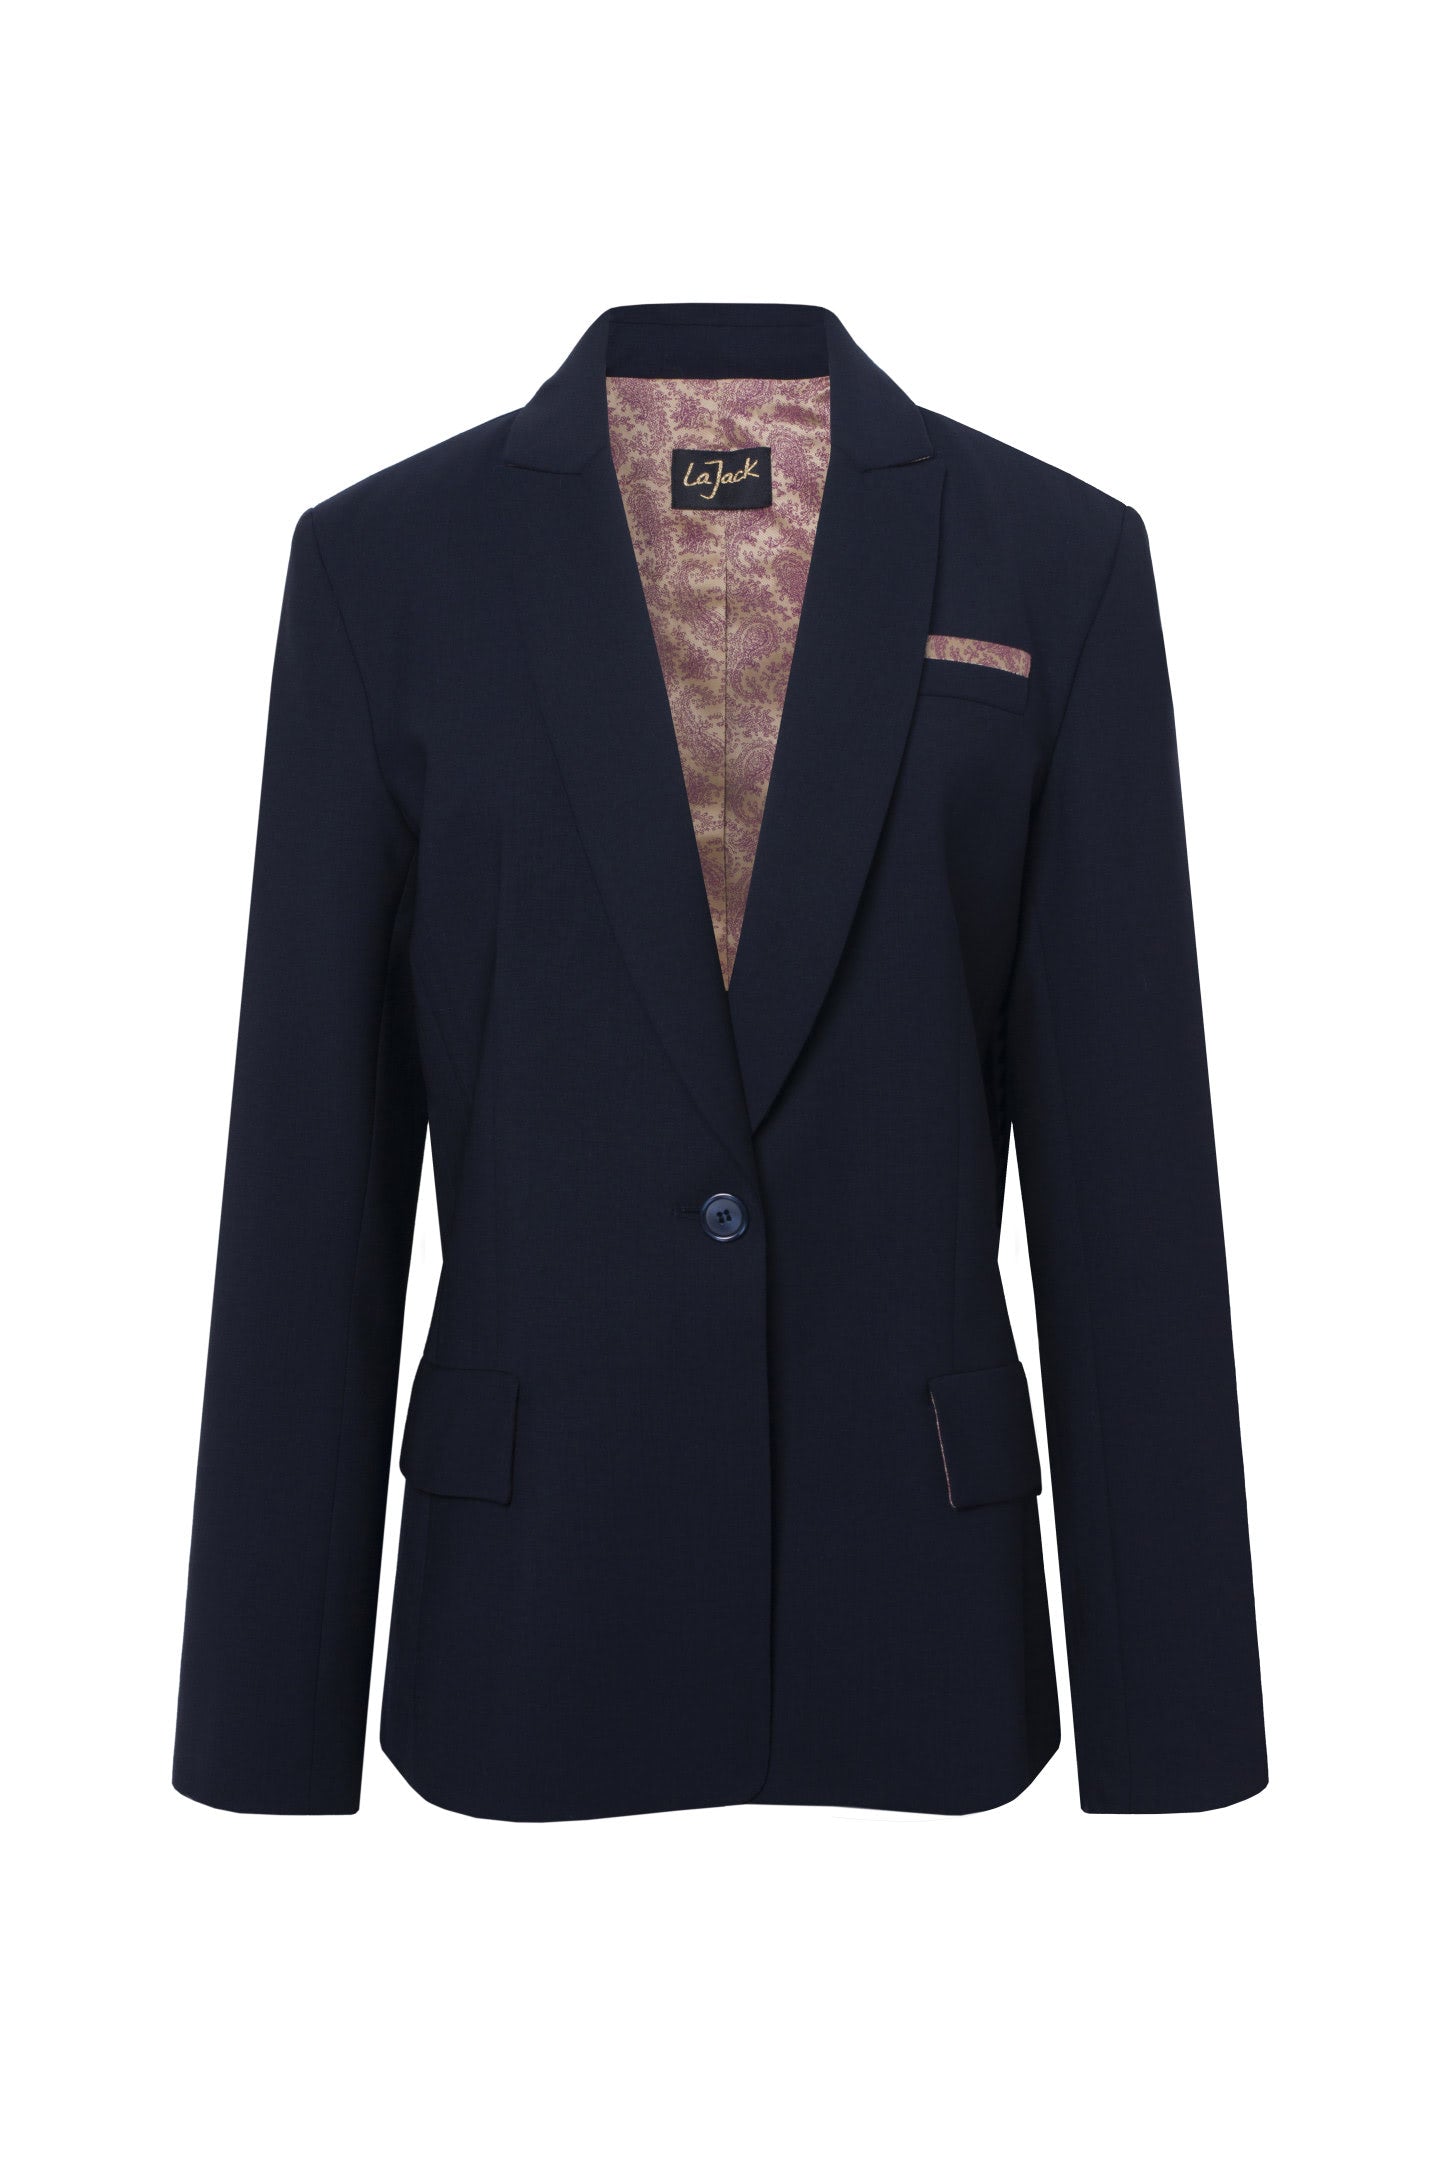 La Jackie Marine - Navy Wool Fitted Jacket Raspberry &amp; Gold Cashmere Lining